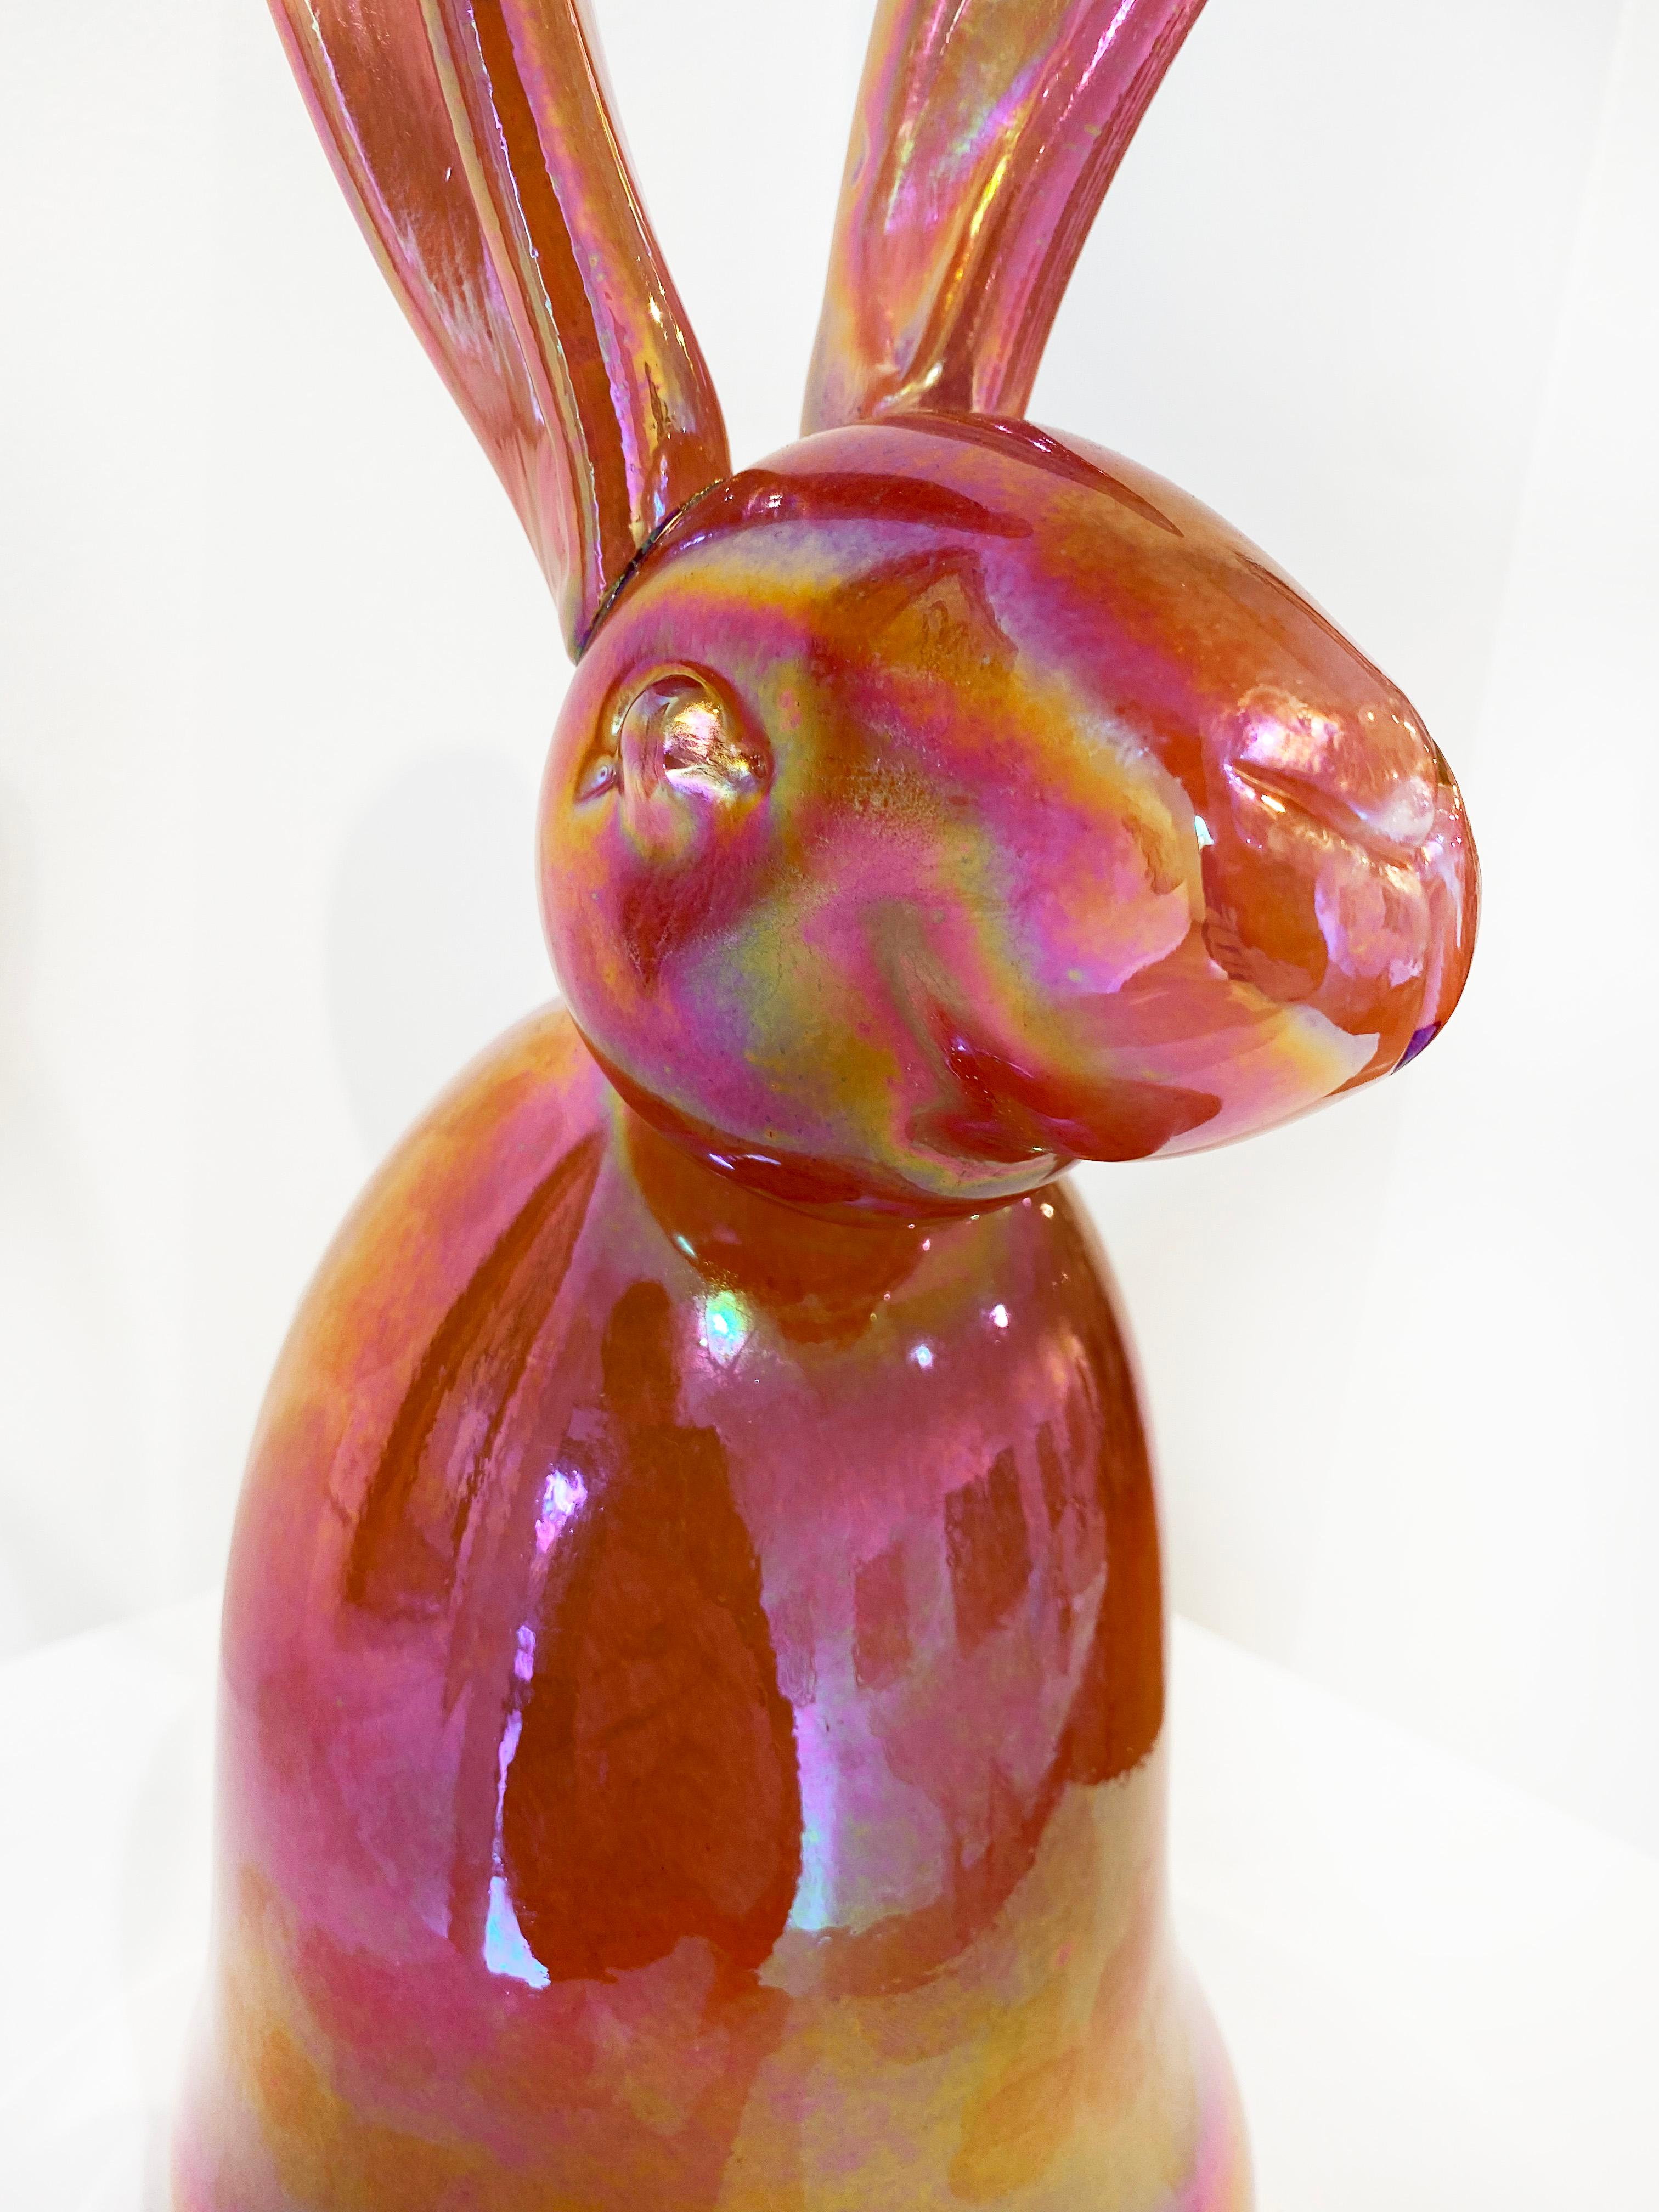 'Julius' by Hunt Slonem, 2020. Blown-glass sculpture, 17.5 x 5 x 7.5 in. This glass sculpture depicts one of Slonem's signature bunnies in bright pink with an irridescent finish that reflects light beautifully.

Slonem’s new blown-glass sculptures